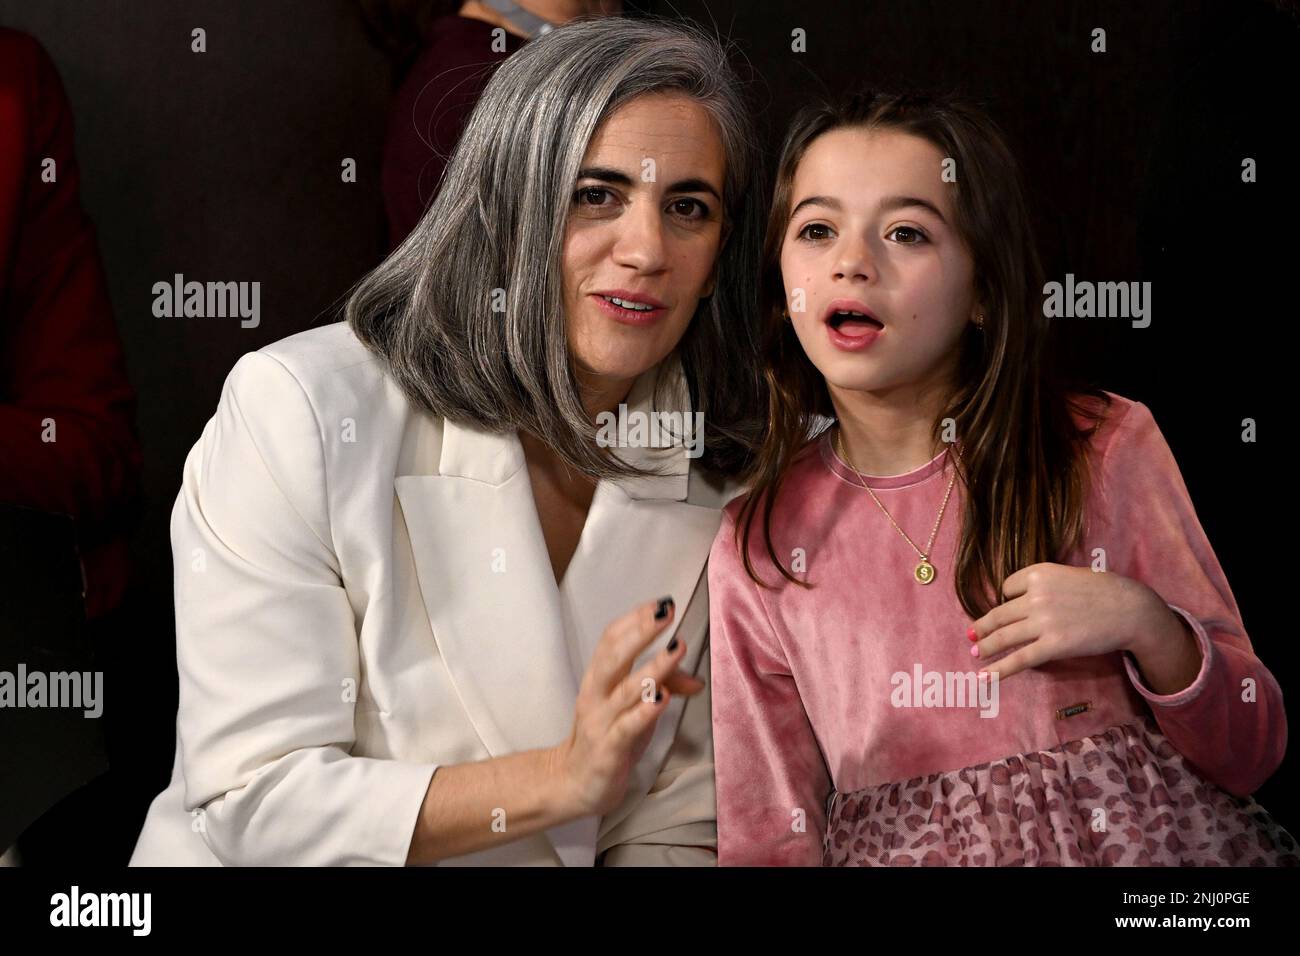 22 February 2023, Berlin: Lara Izagirre Garizurieta (l), producer, and Sofia Otero , actress, attend the press conference of the film 'especies de abejas' (20,000 Species of Bees), which is in competition at the Berlinale. The 73rd International Film Festival will be held in Berlin from 16 - 26.02.2023. Photo: Jens Kalaene/dpa Stock Photo